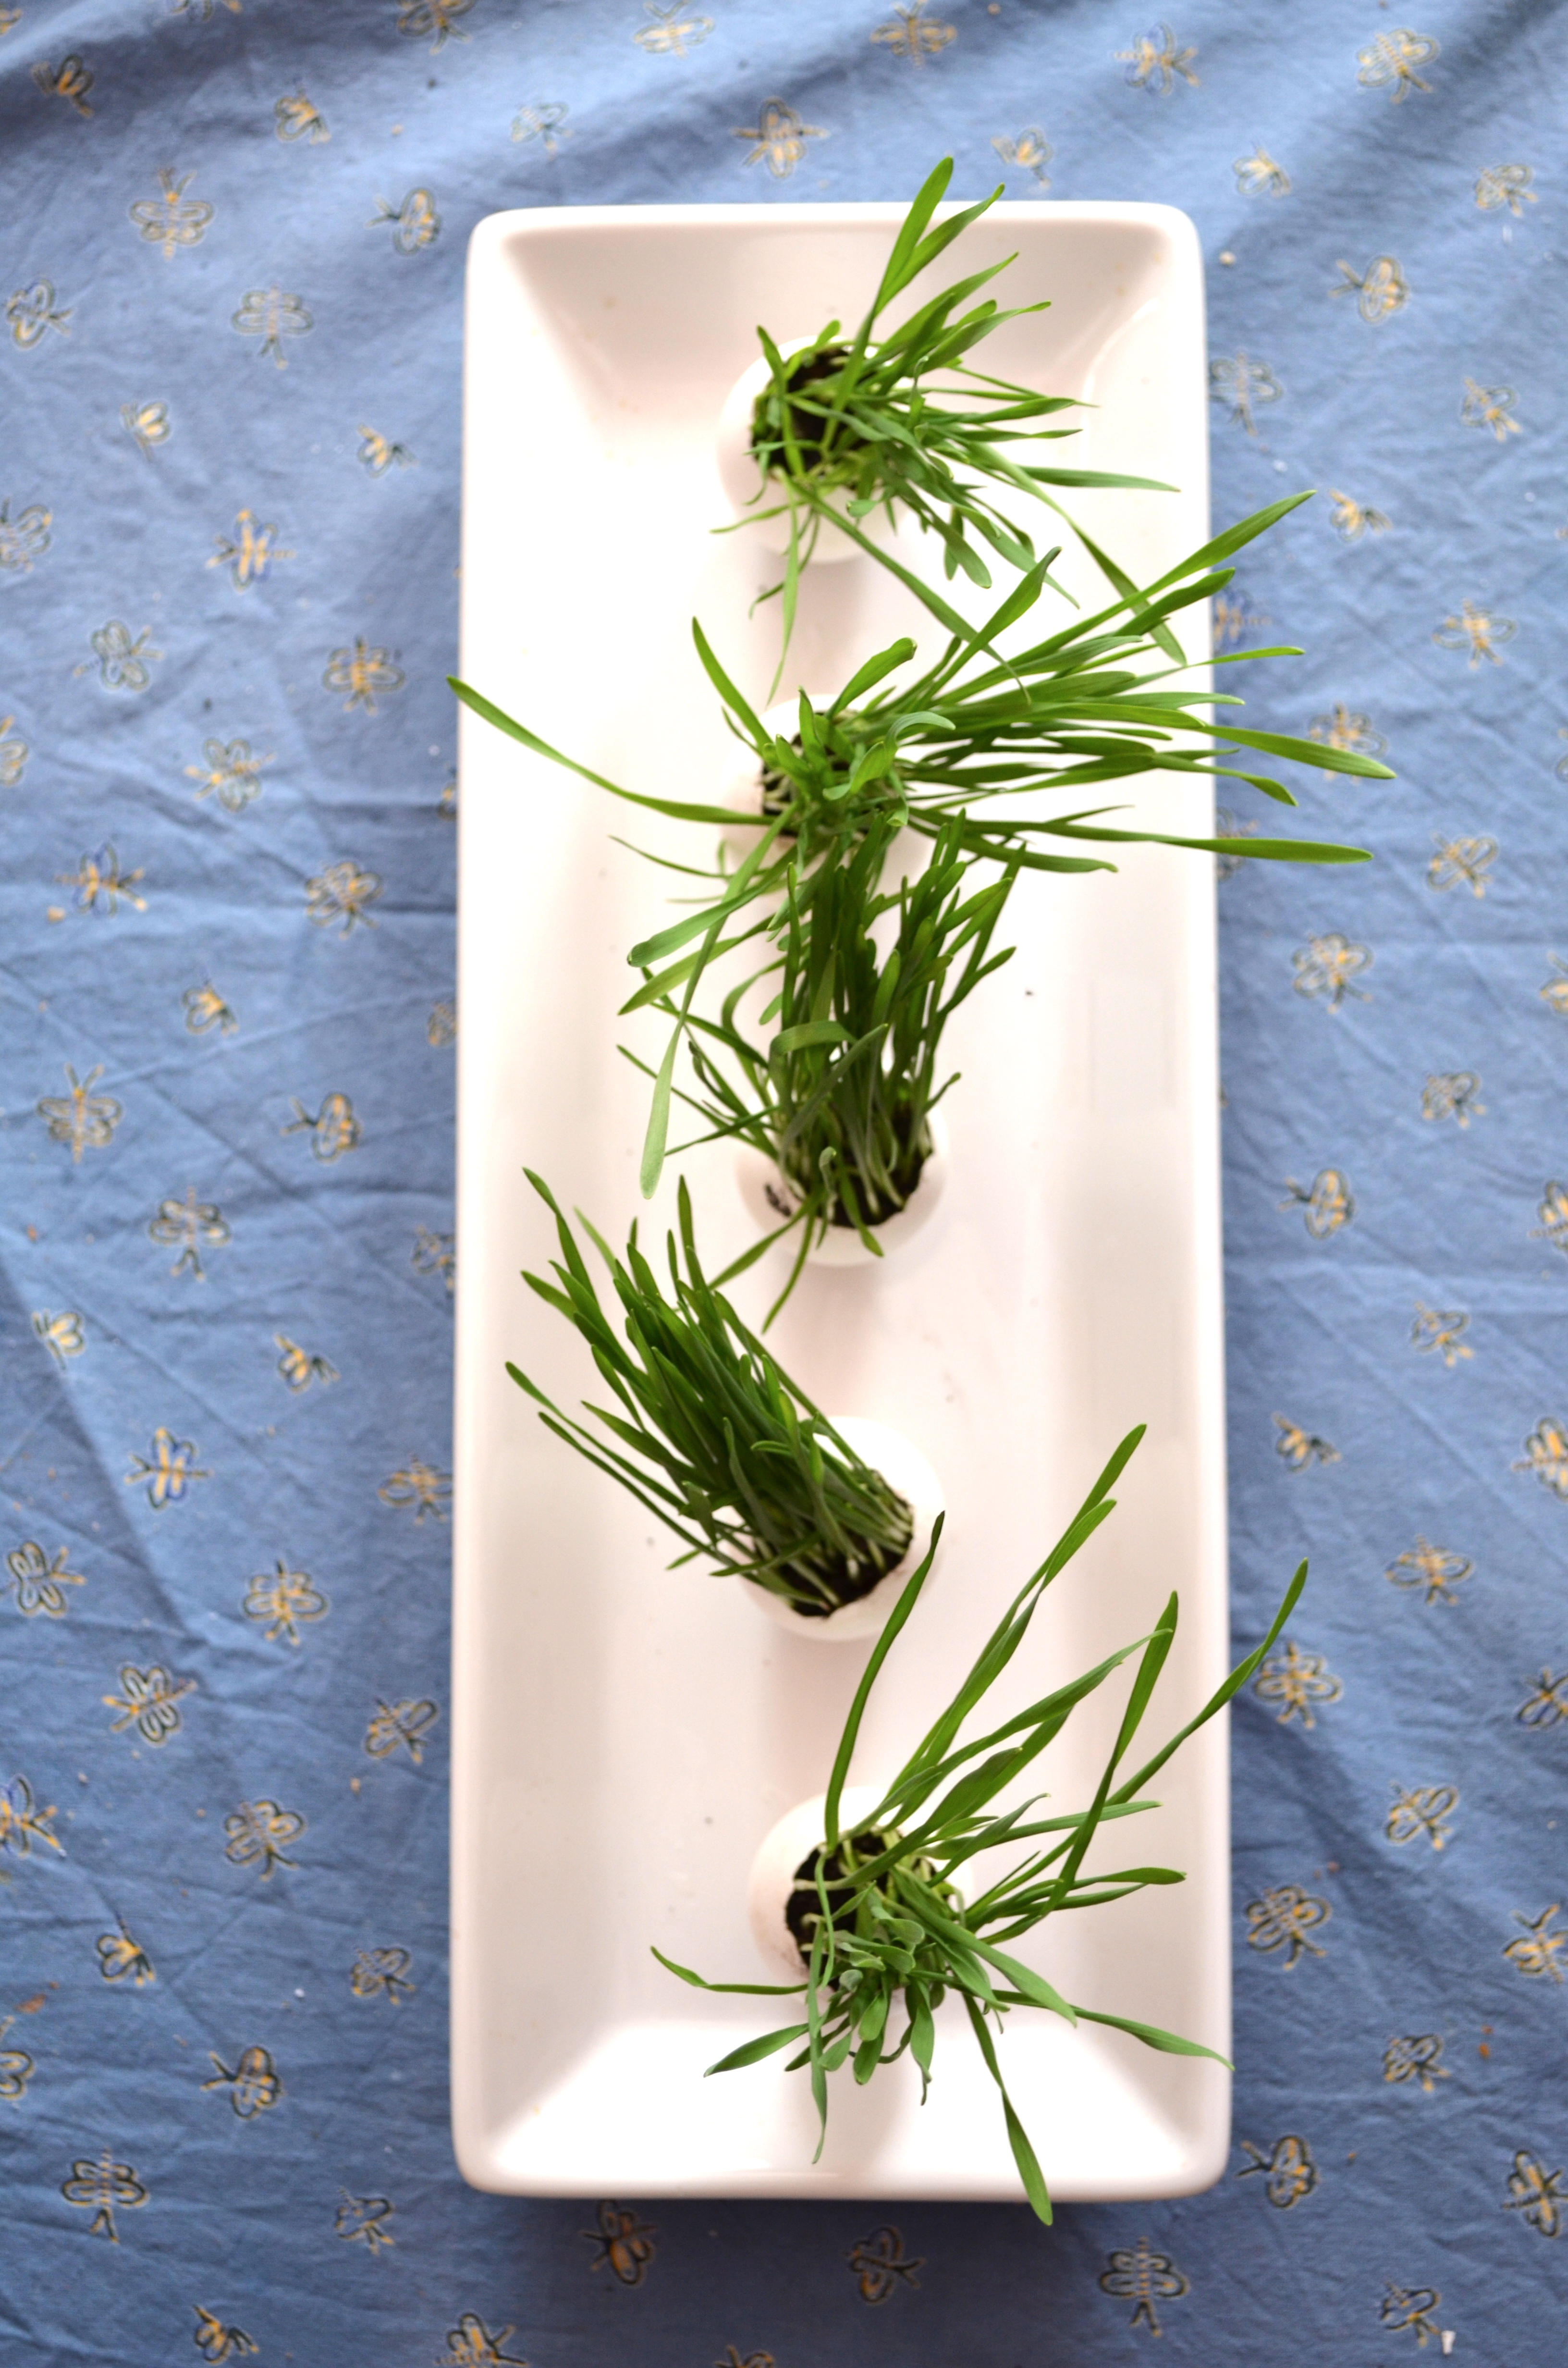 DIY Easter Egg and Grass Centerpiece via the Path Less Traveled